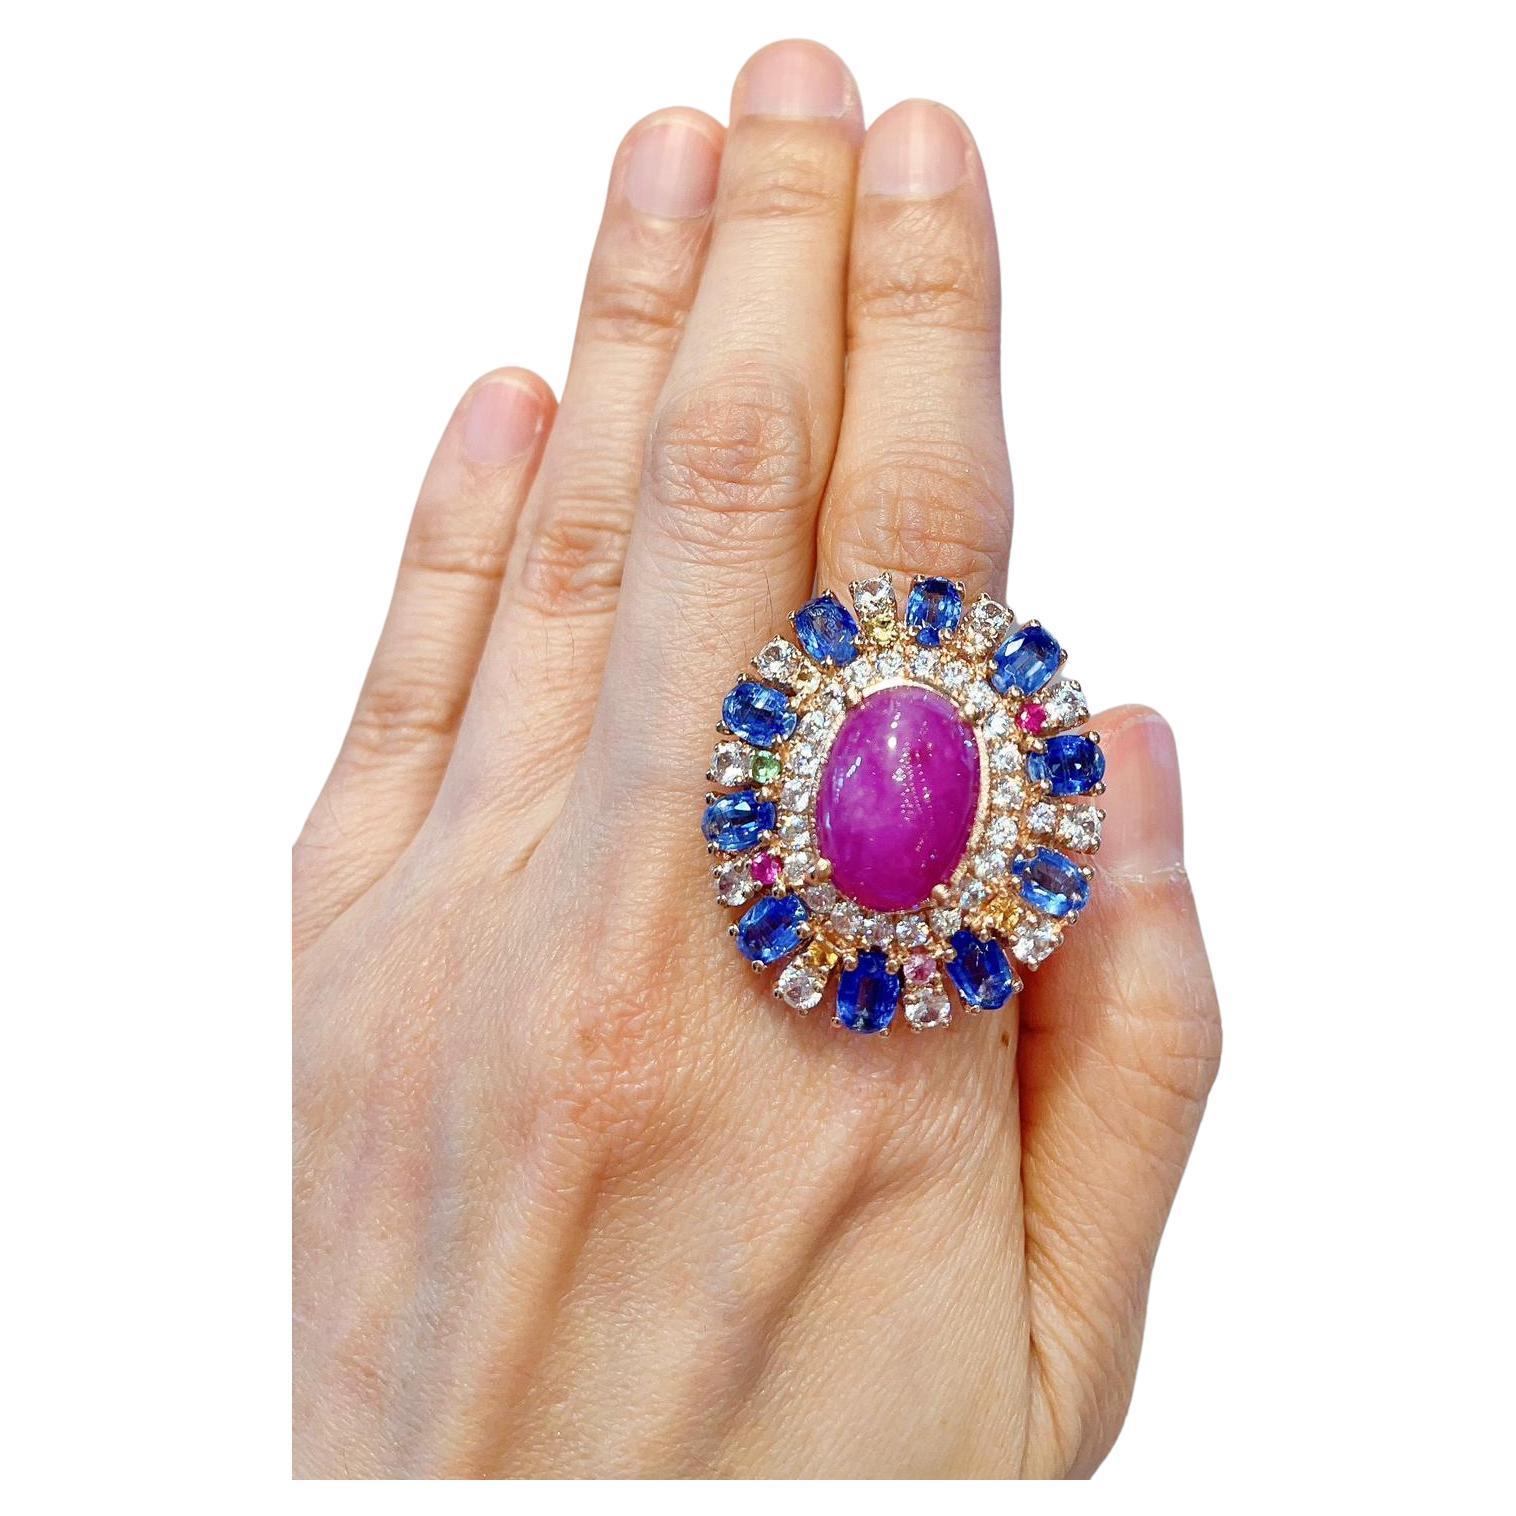 Bochic Ruby, Tanzanite & Fancy Sapphire Candy Cocktail Ring 
Red Natural Ruby Cabochon
11 Carats 
Oval shape tanzanites
Color - deep purple
14 Carats 
Round brilliant fancy Natural Sri Lankan sapphires
Pink sapphire 
Green sapphire 
Yellow sapphire